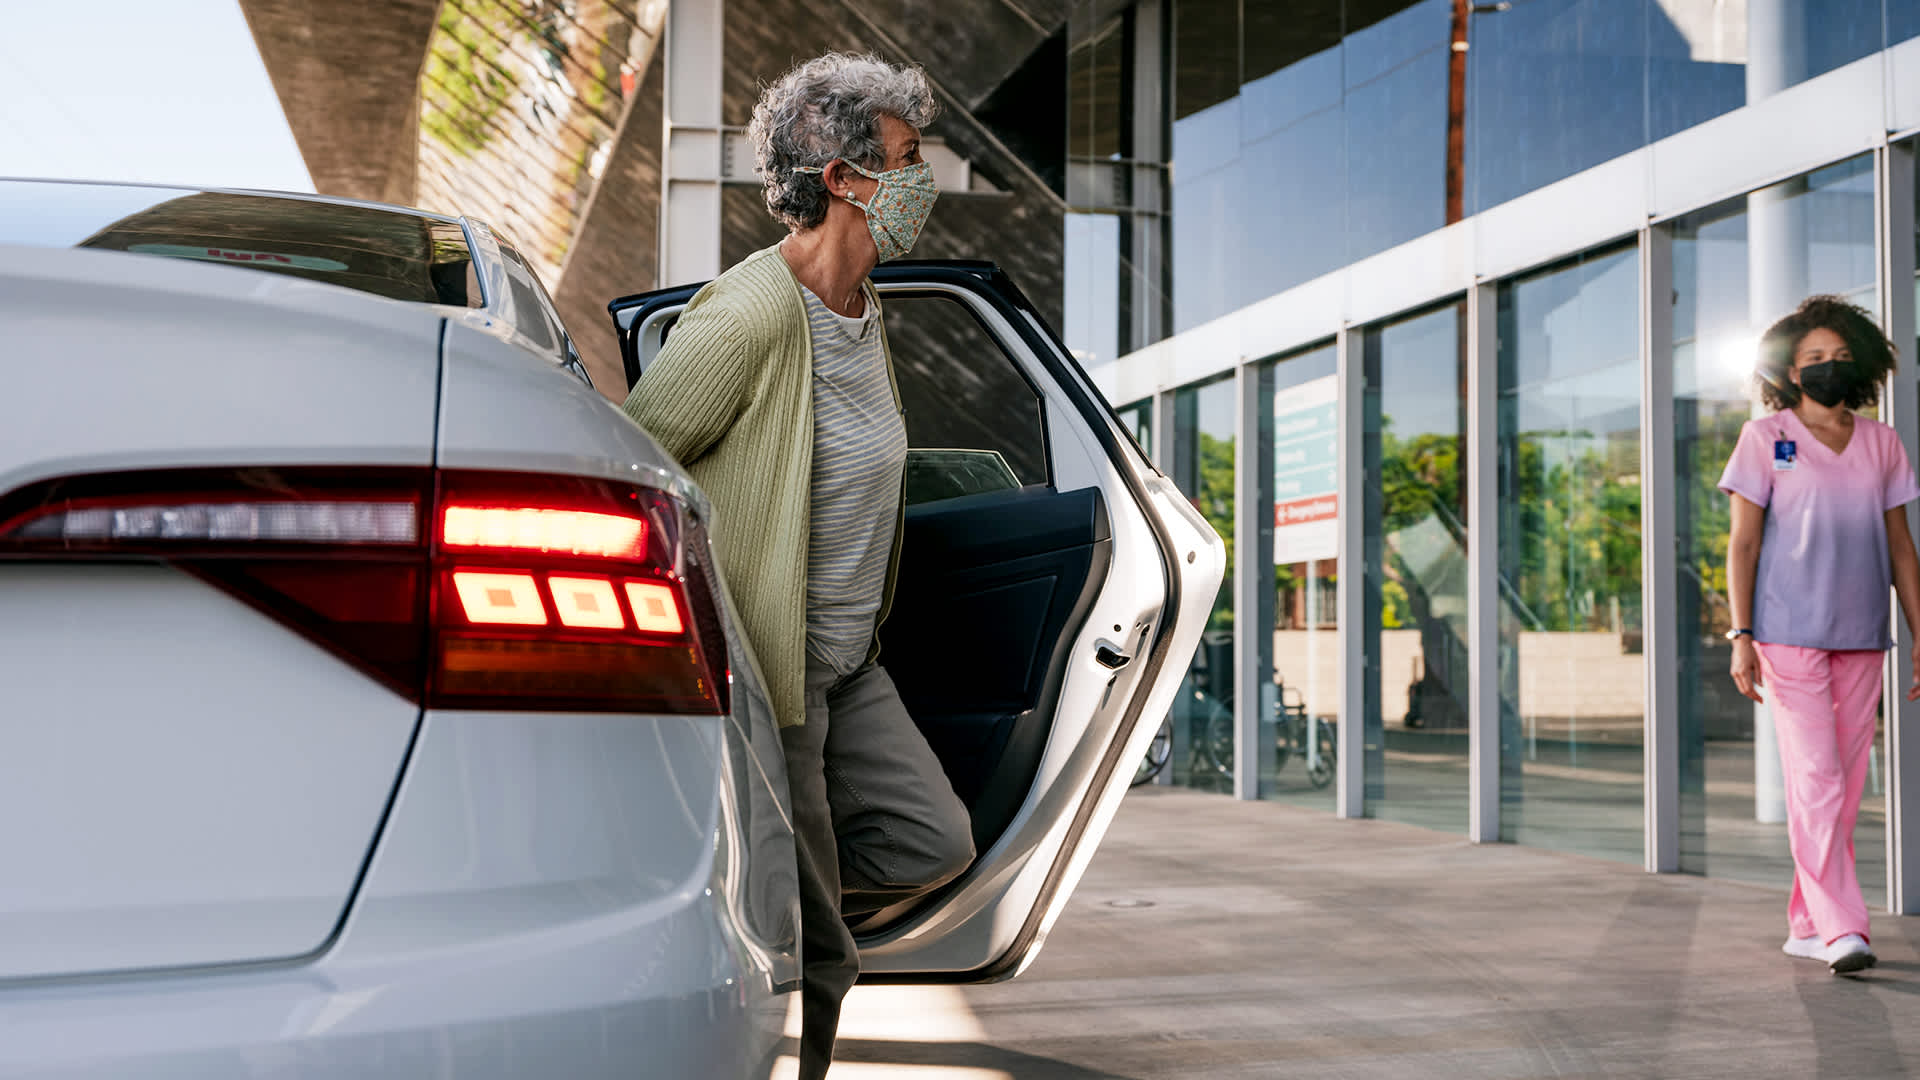 A photograph of a senior woman, wearing a face mask, exiting a car in front of glass doors at a medical facility.